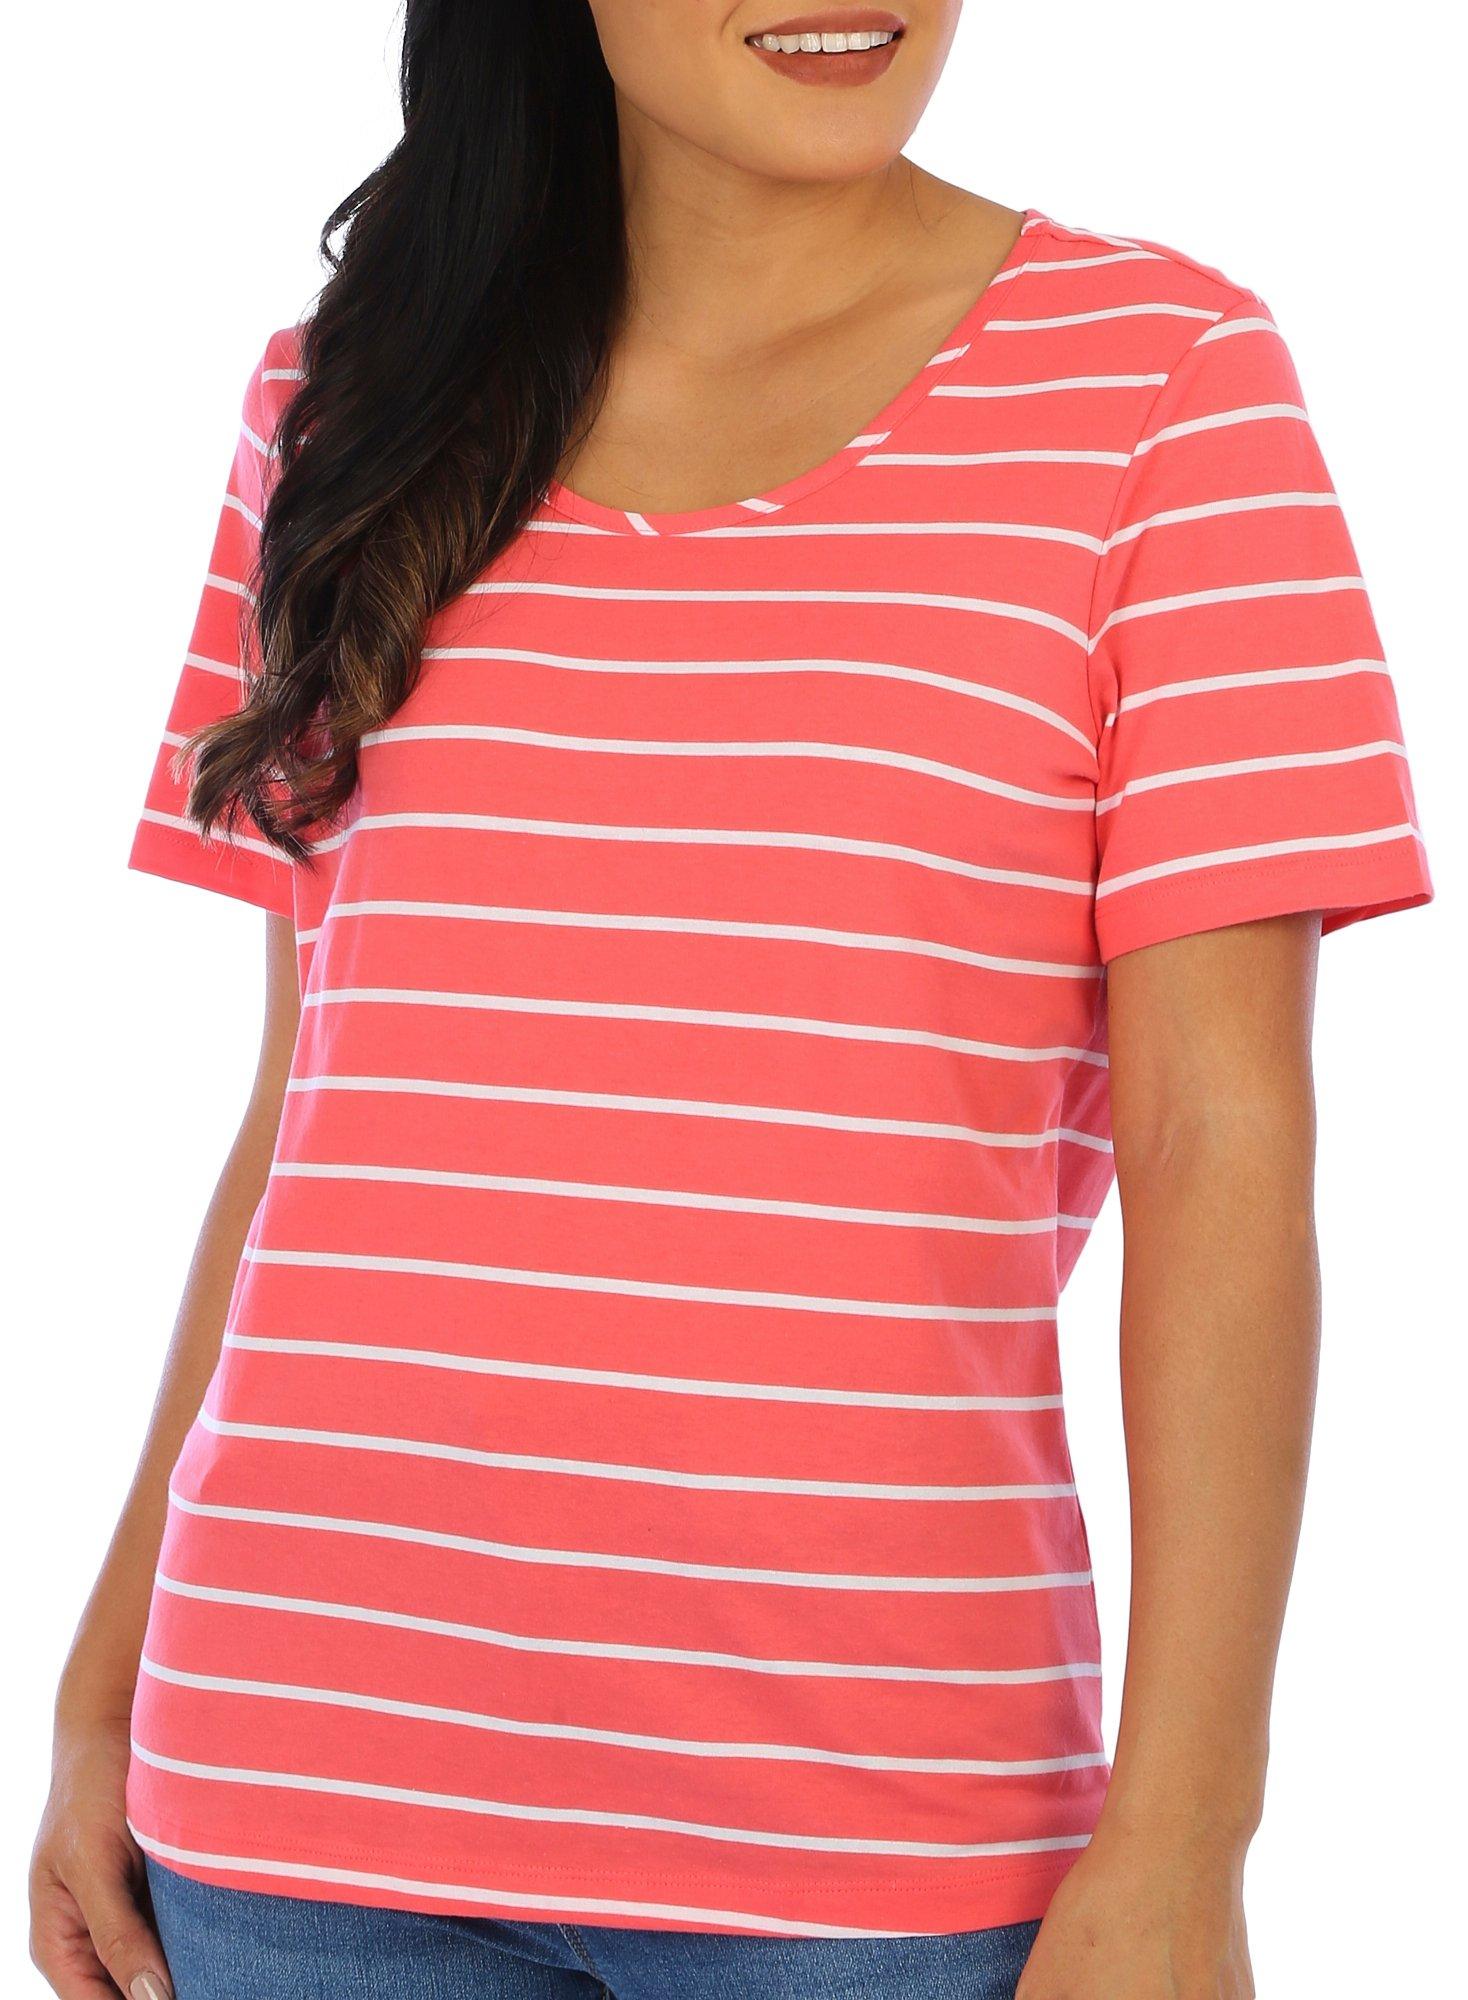 Coral Bay Womens Stripe Round Neck Short Sleeve Top